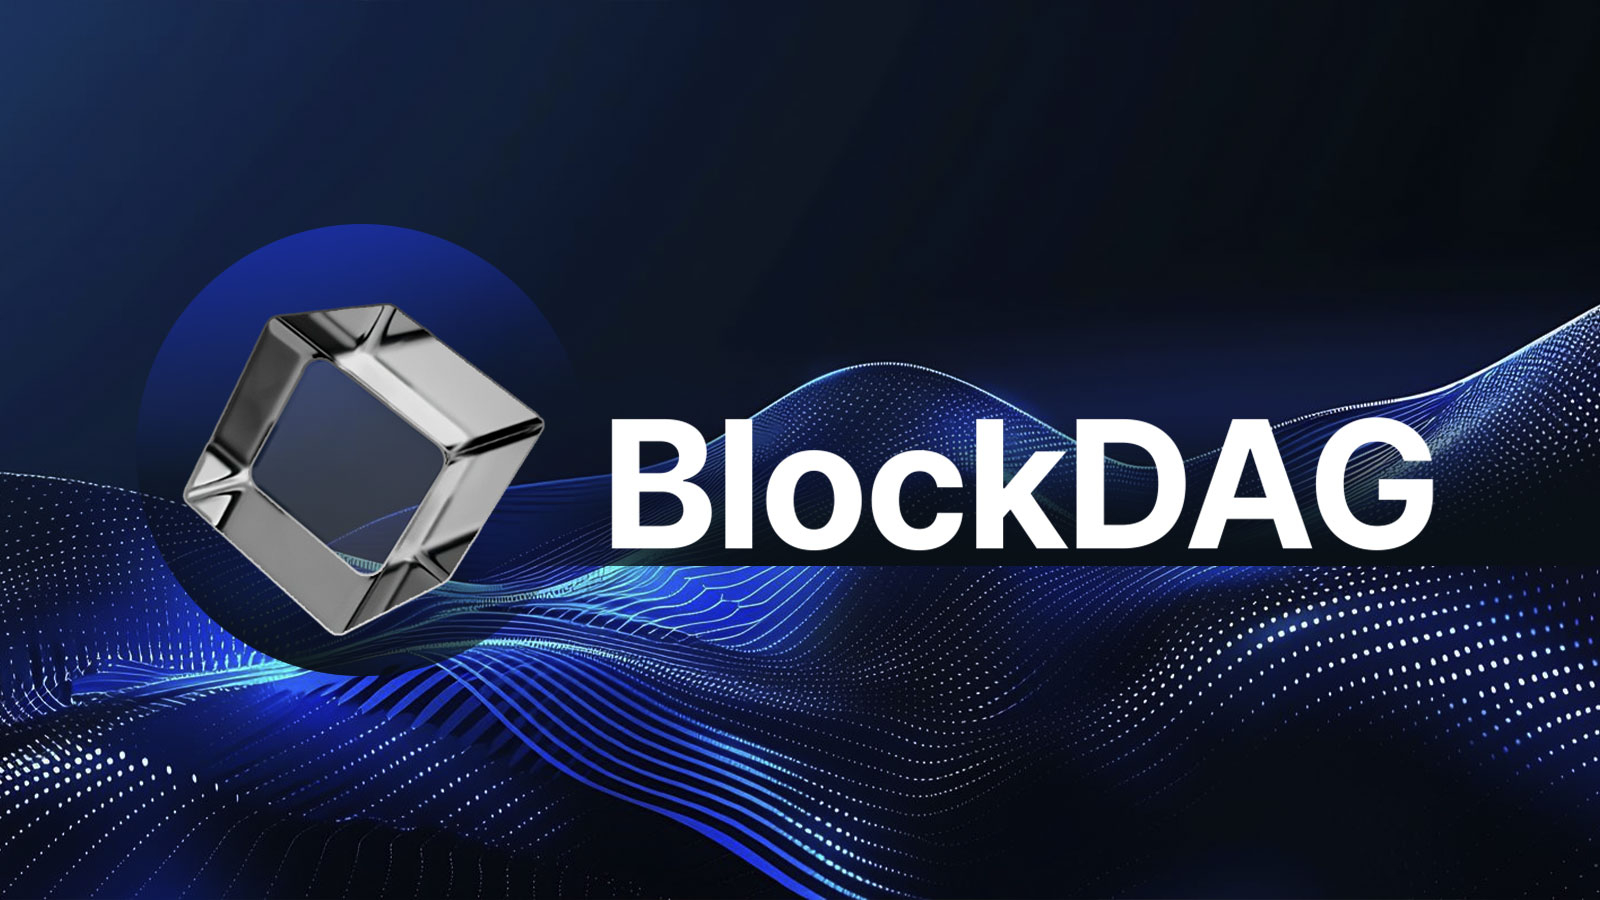 BlockDAG (BDAG) Novel Asset Sale Might be Welcoming New Supporters in Late April while Solana (SOL) and Cosmos (ATOM) Top Altcoins Gaining Traction